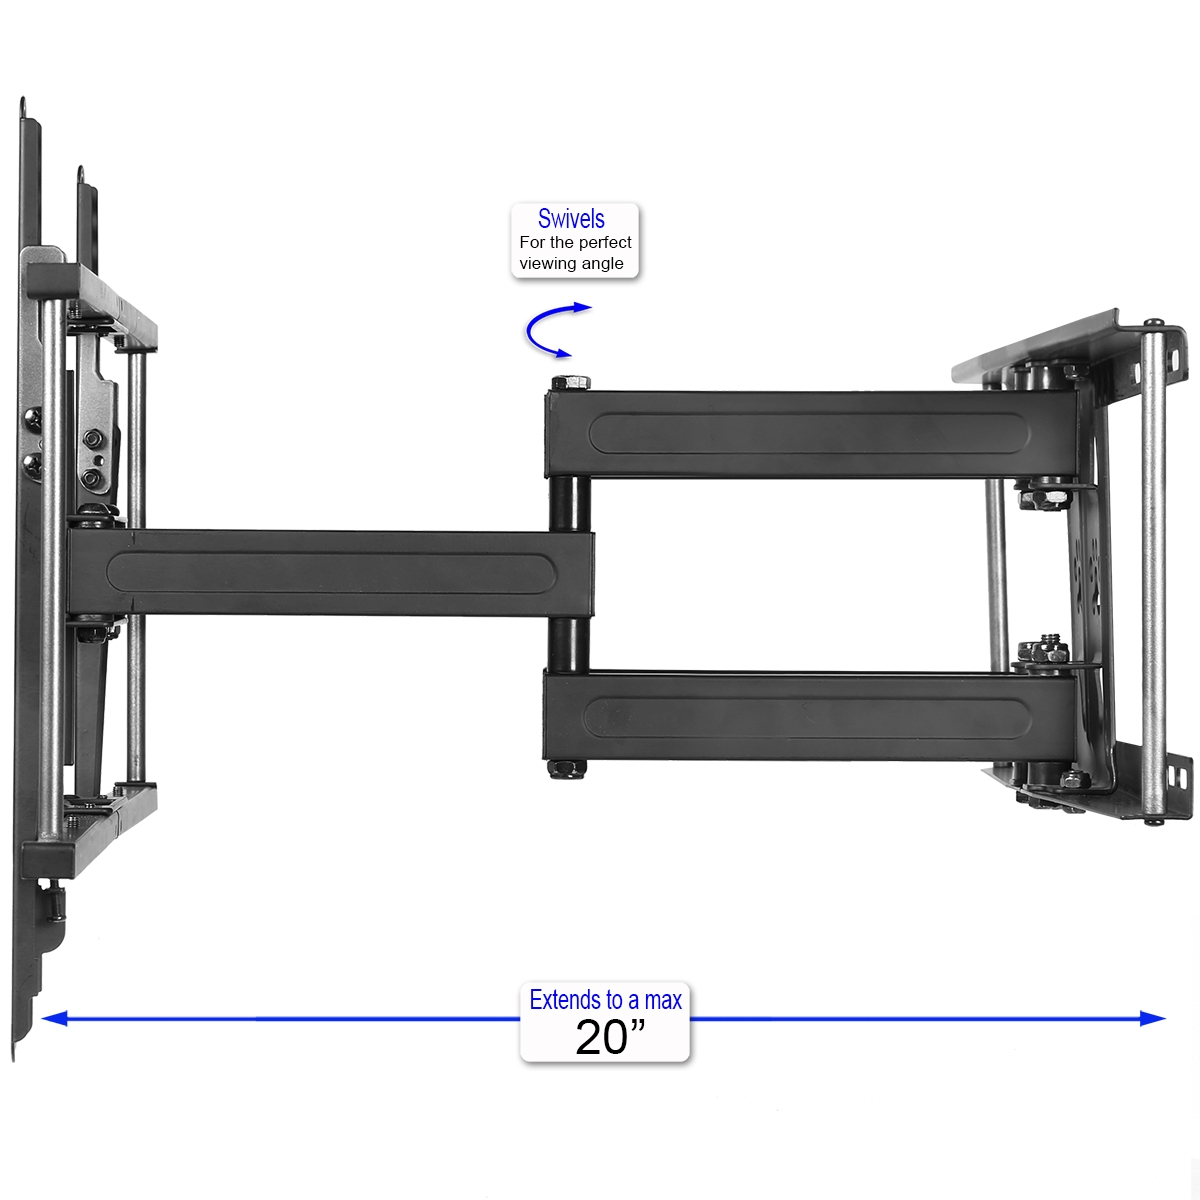 Cheetah Mounts APDAM2B Dual Articulating Arm (20” Extension) TV Wall Mount Bracket for 32-65” TVs (many up to 75” or more) up to VESA 600 and 165lbs